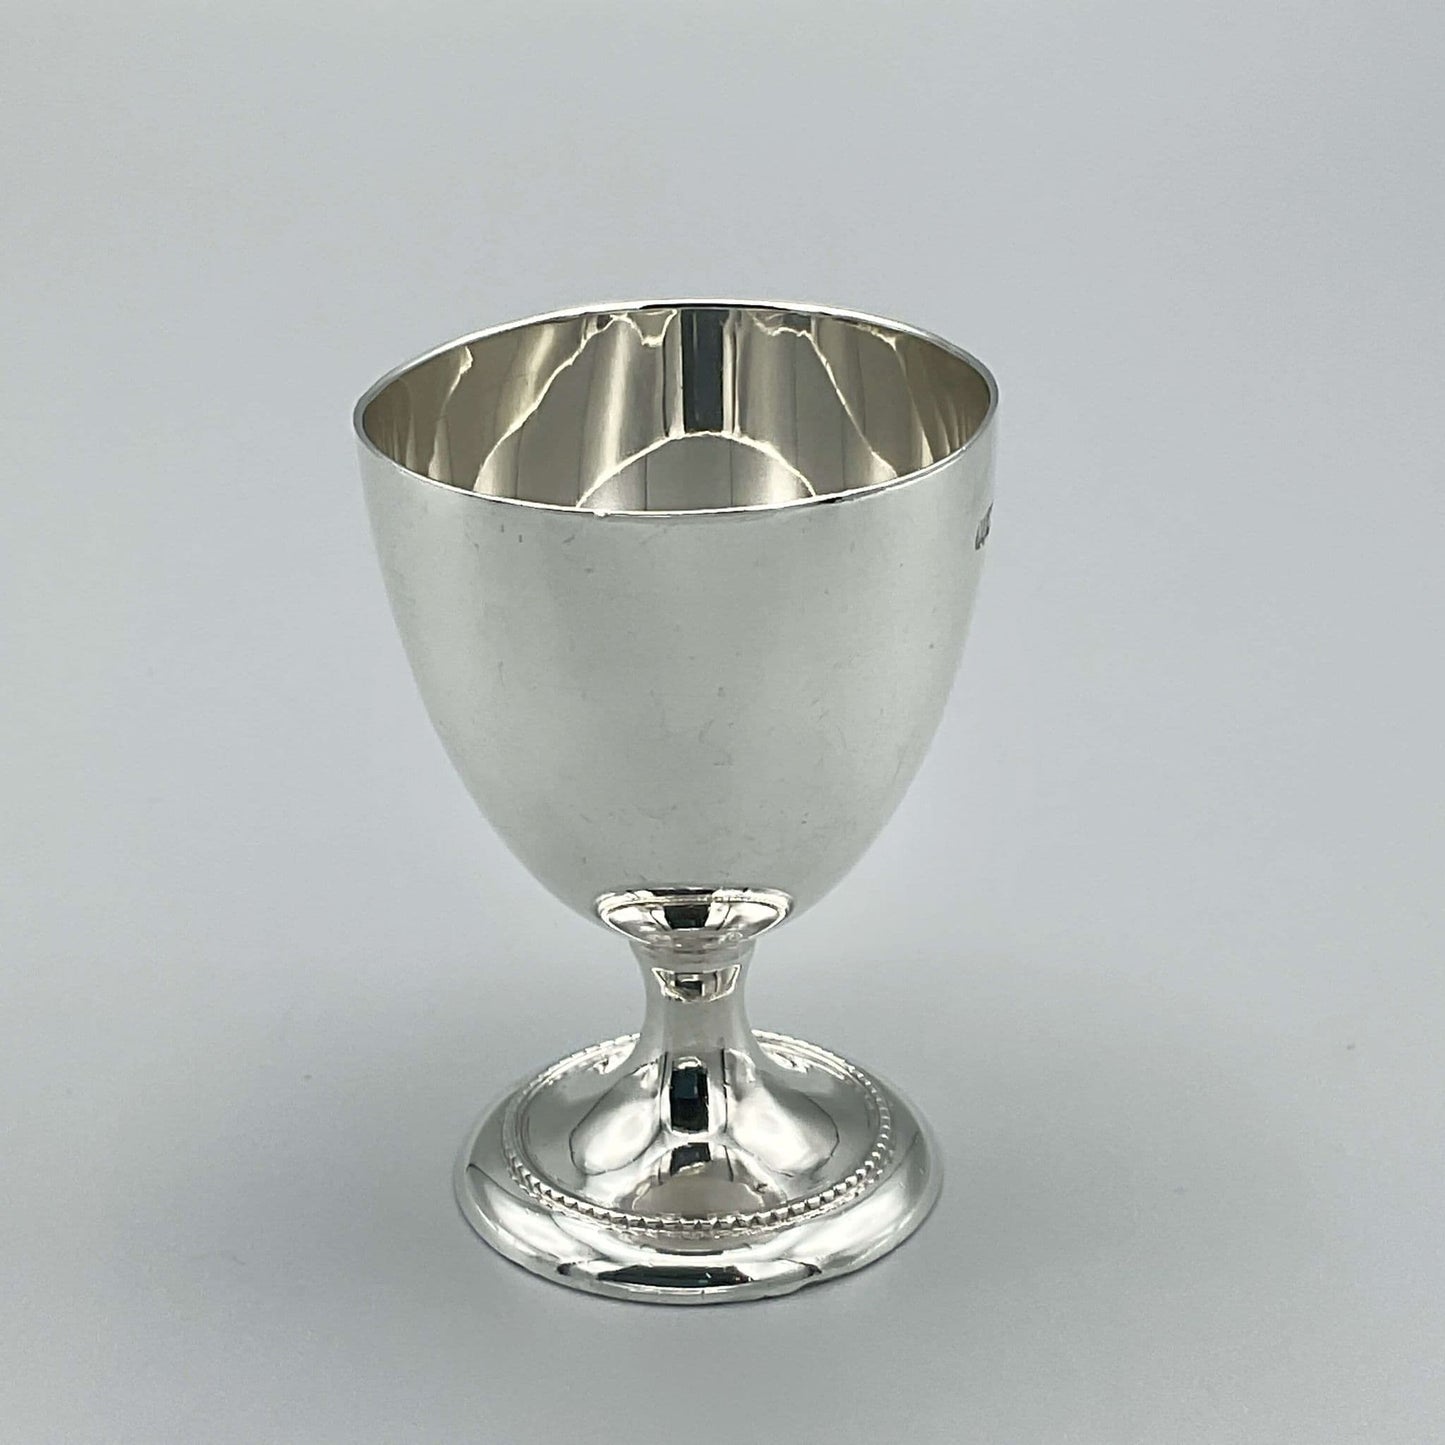 1944 Sterling Silver Egg Cup, Christening or Baby Gift